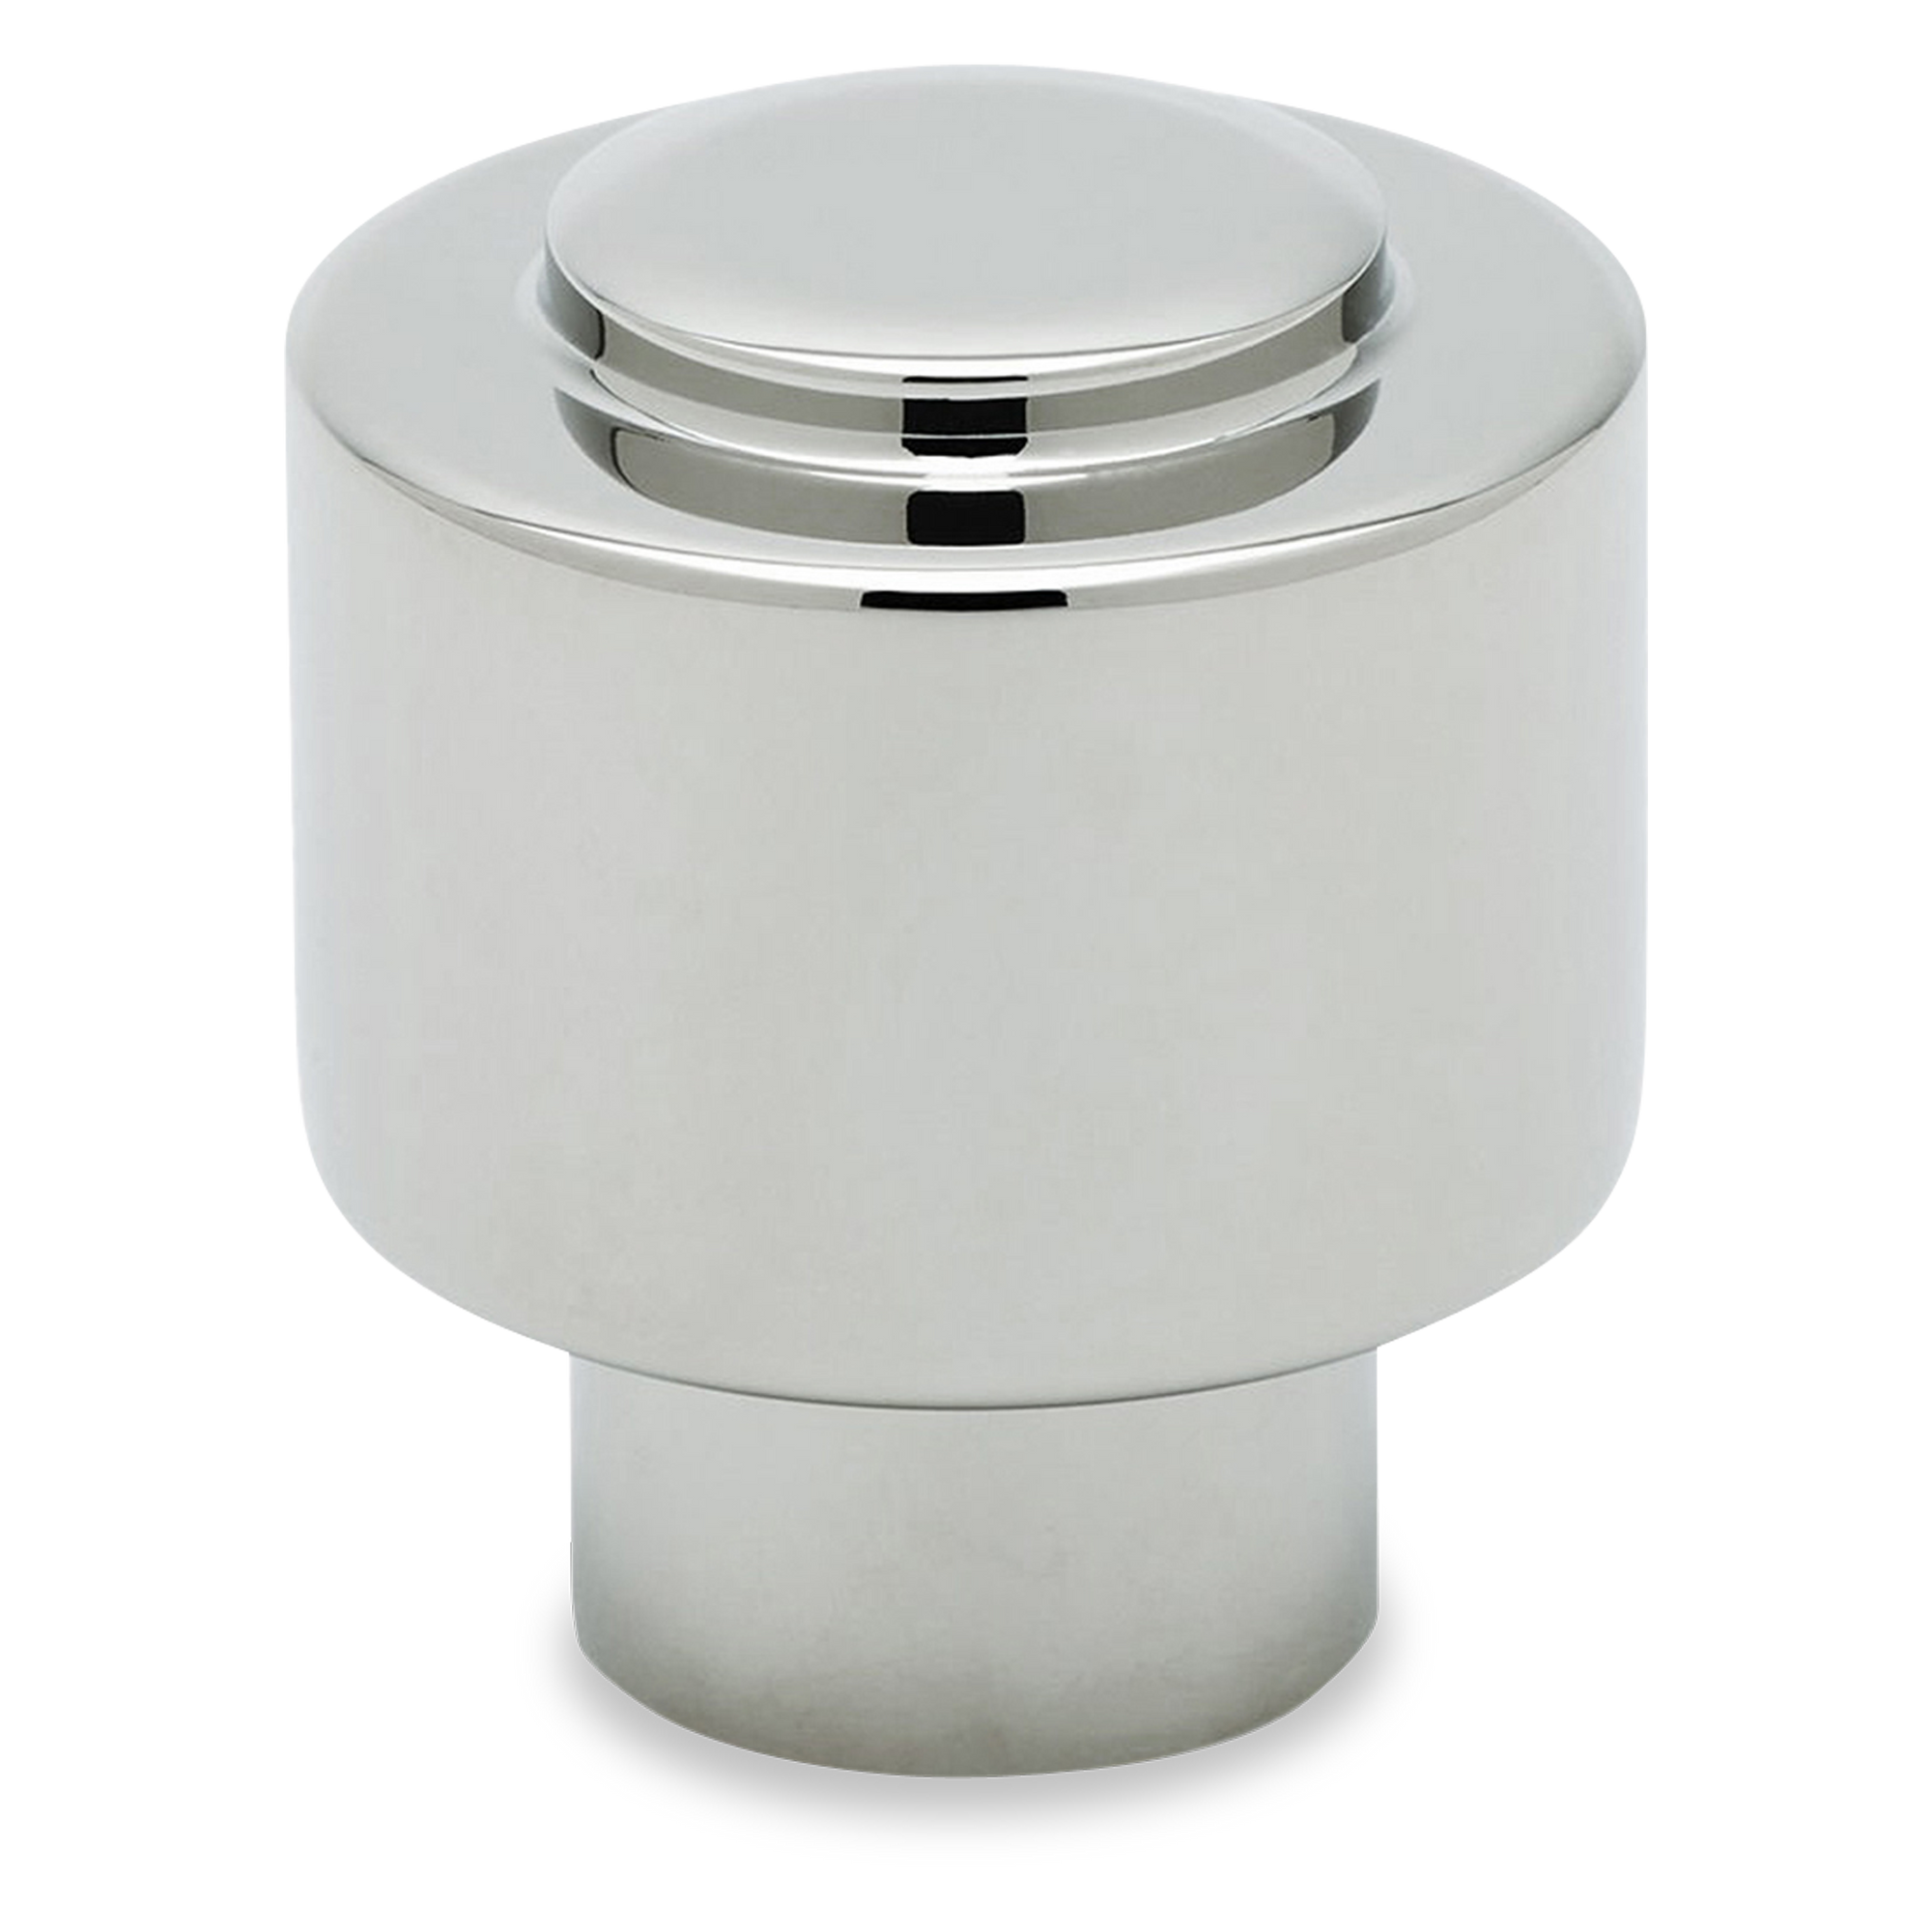 For the every day minimalist, this knob can be an essential detail to add a bit of flare to the home.